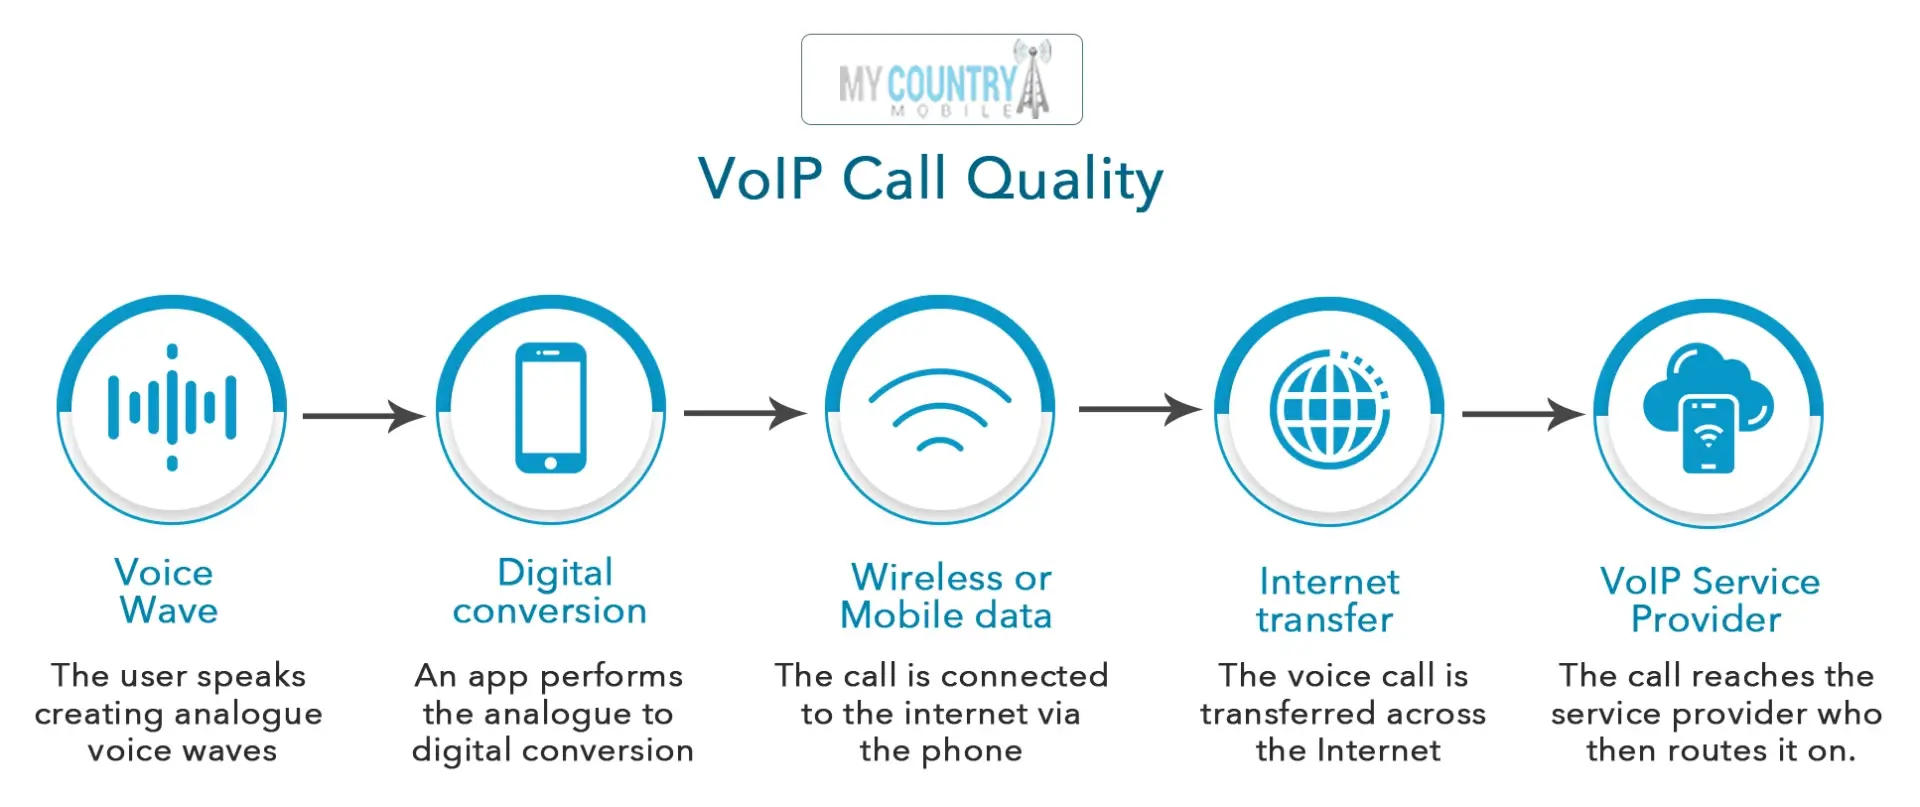 VoIP-call-Quality-